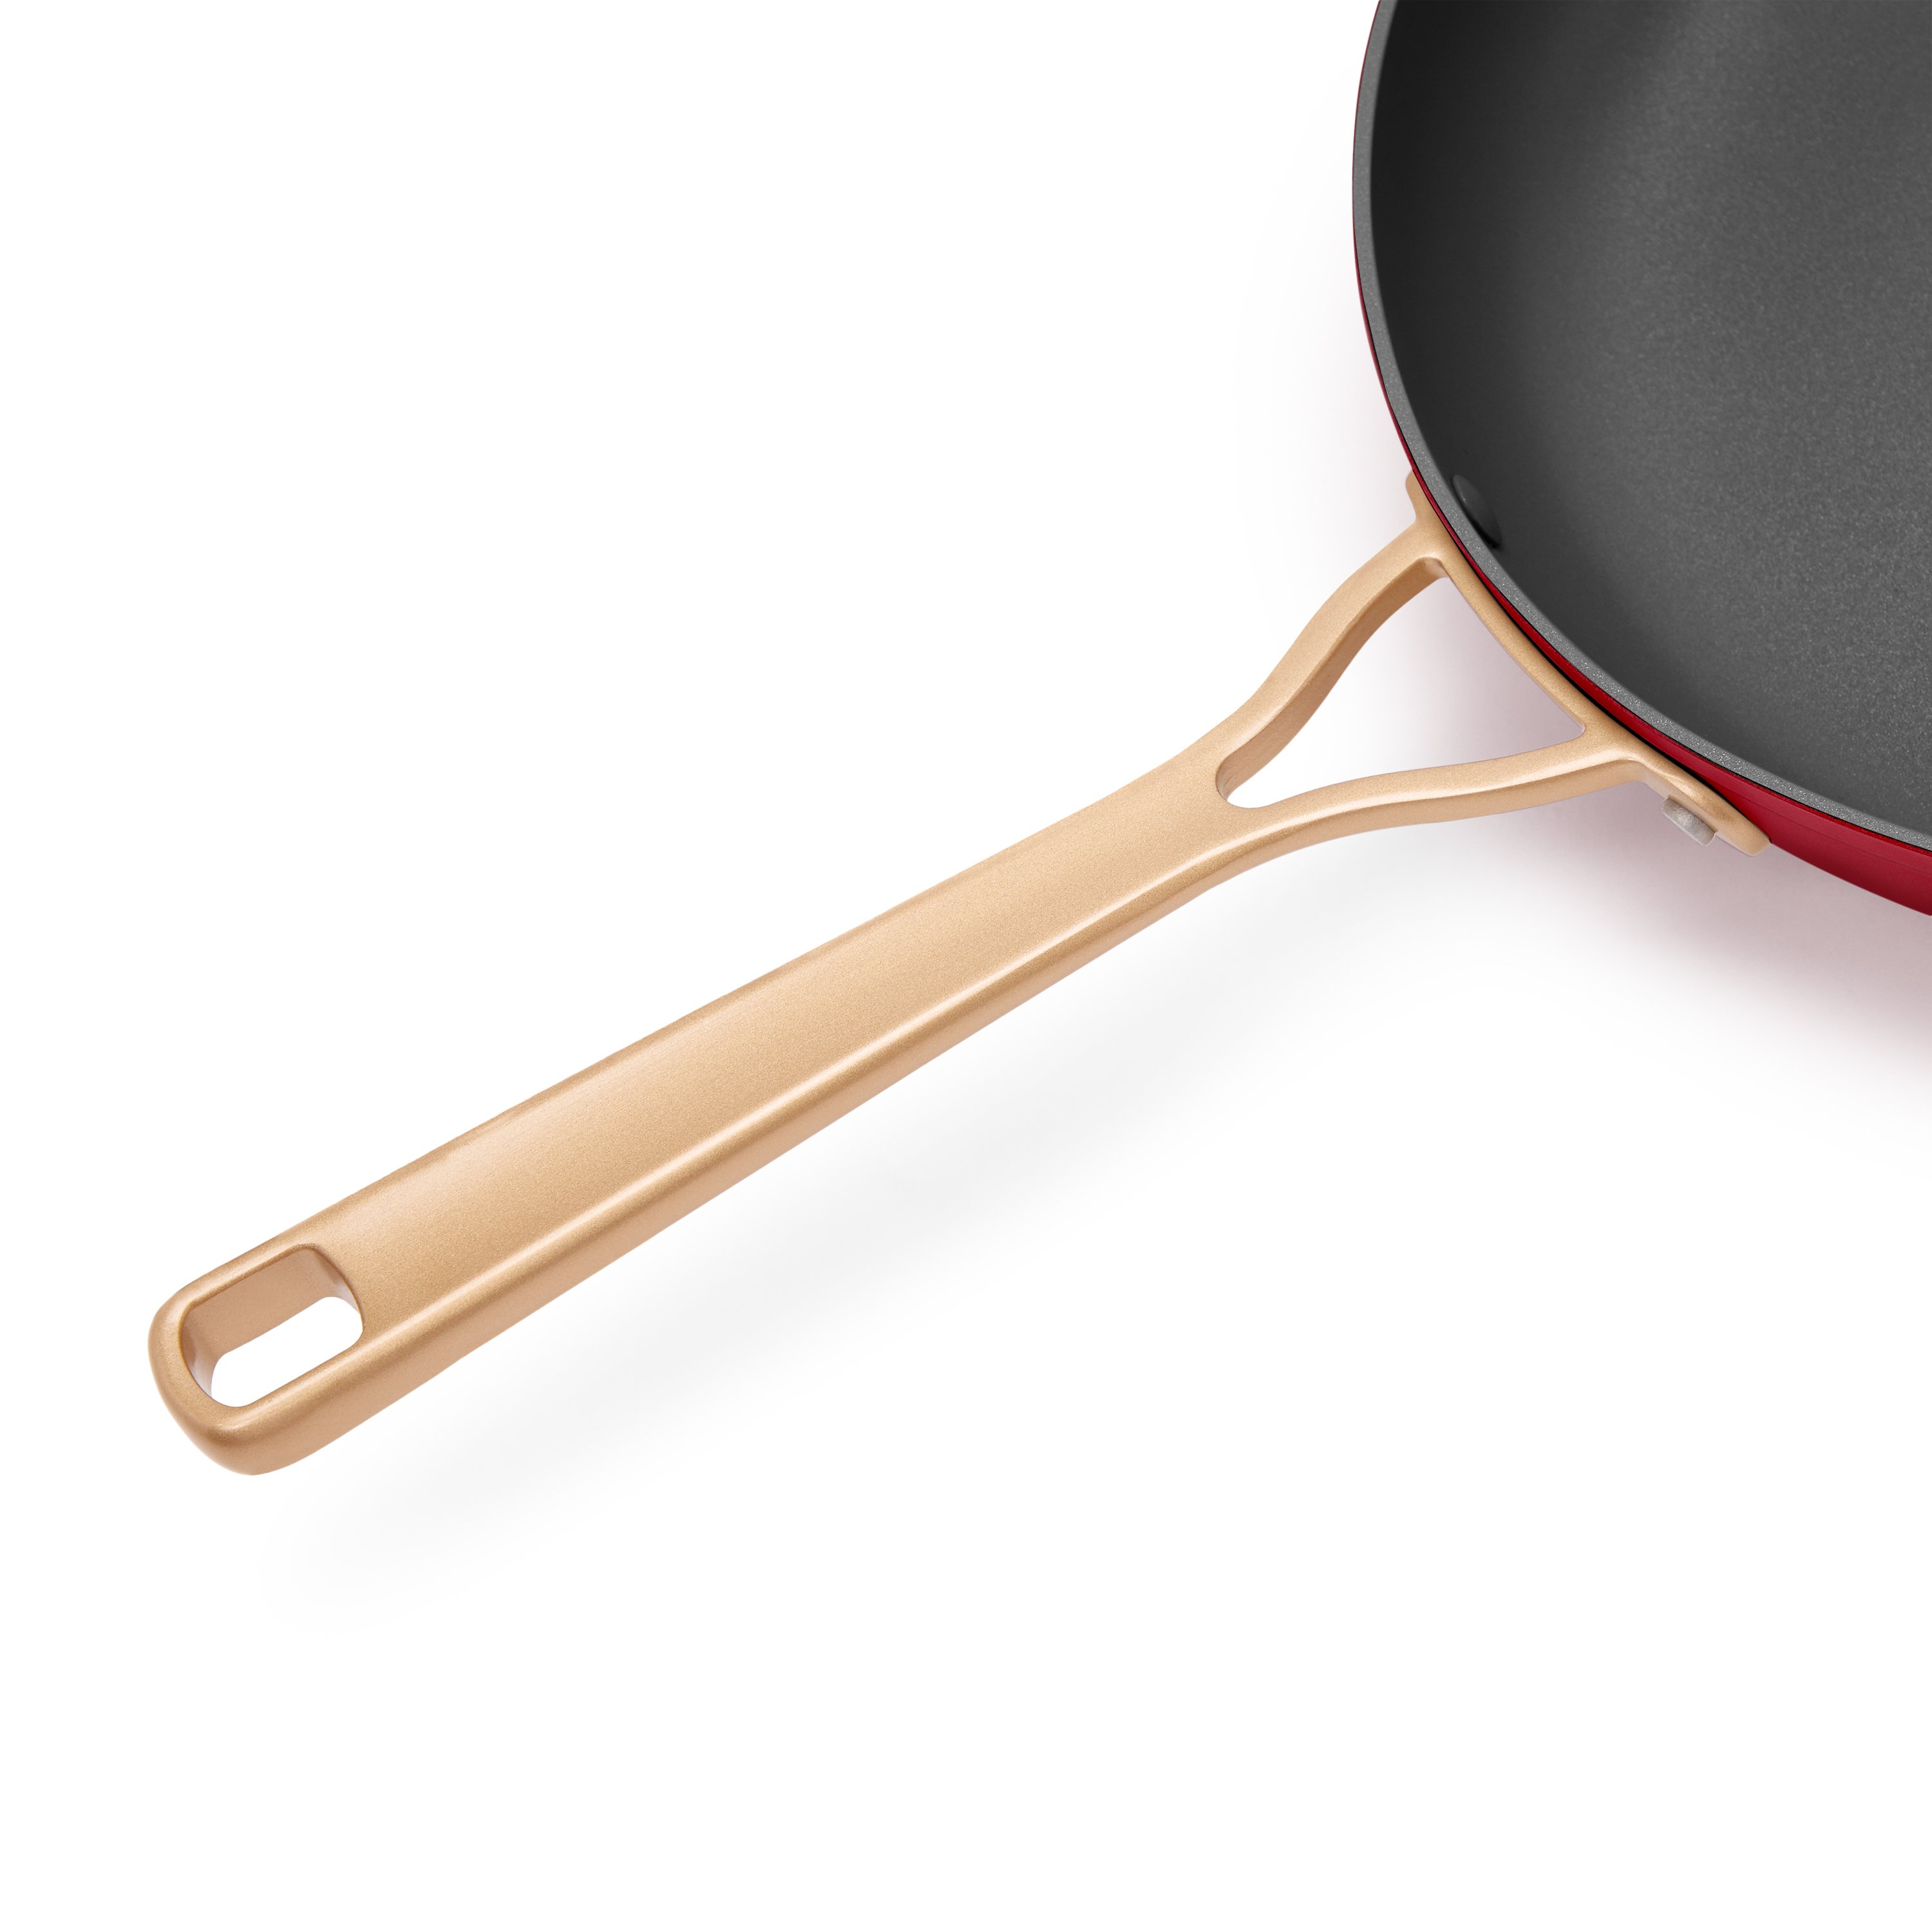 Cocinaware Red Marble Non-Stick Fry Pan Set - Shop Frying Pans & Griddles  at H-E-B